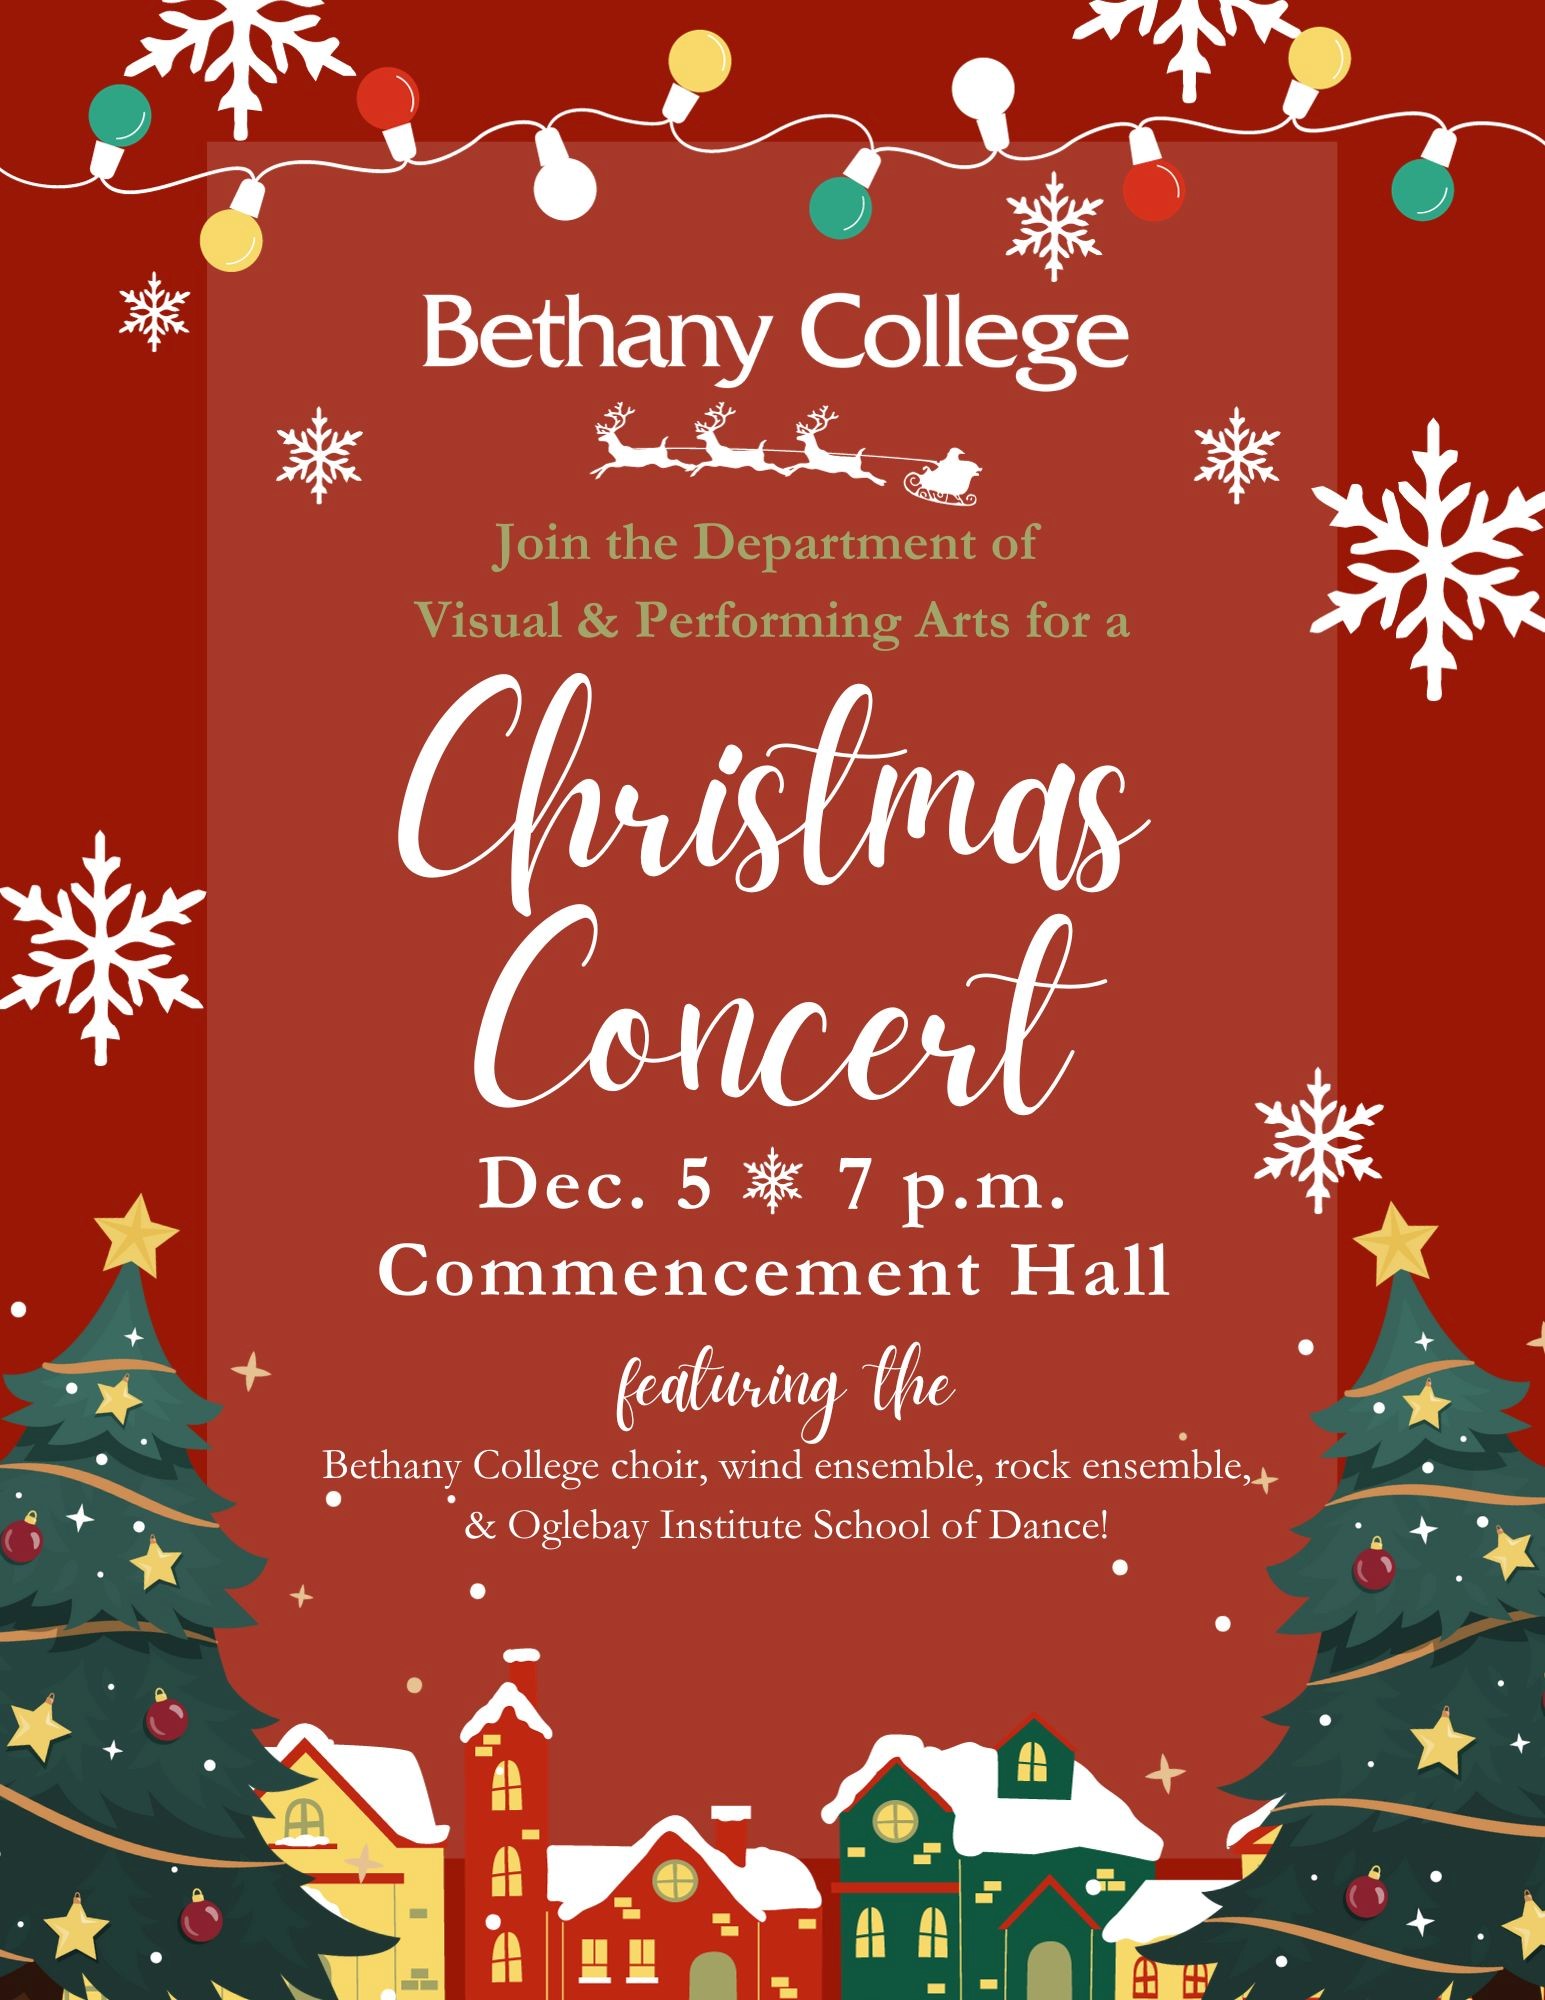 Bethany College Christmas Concert